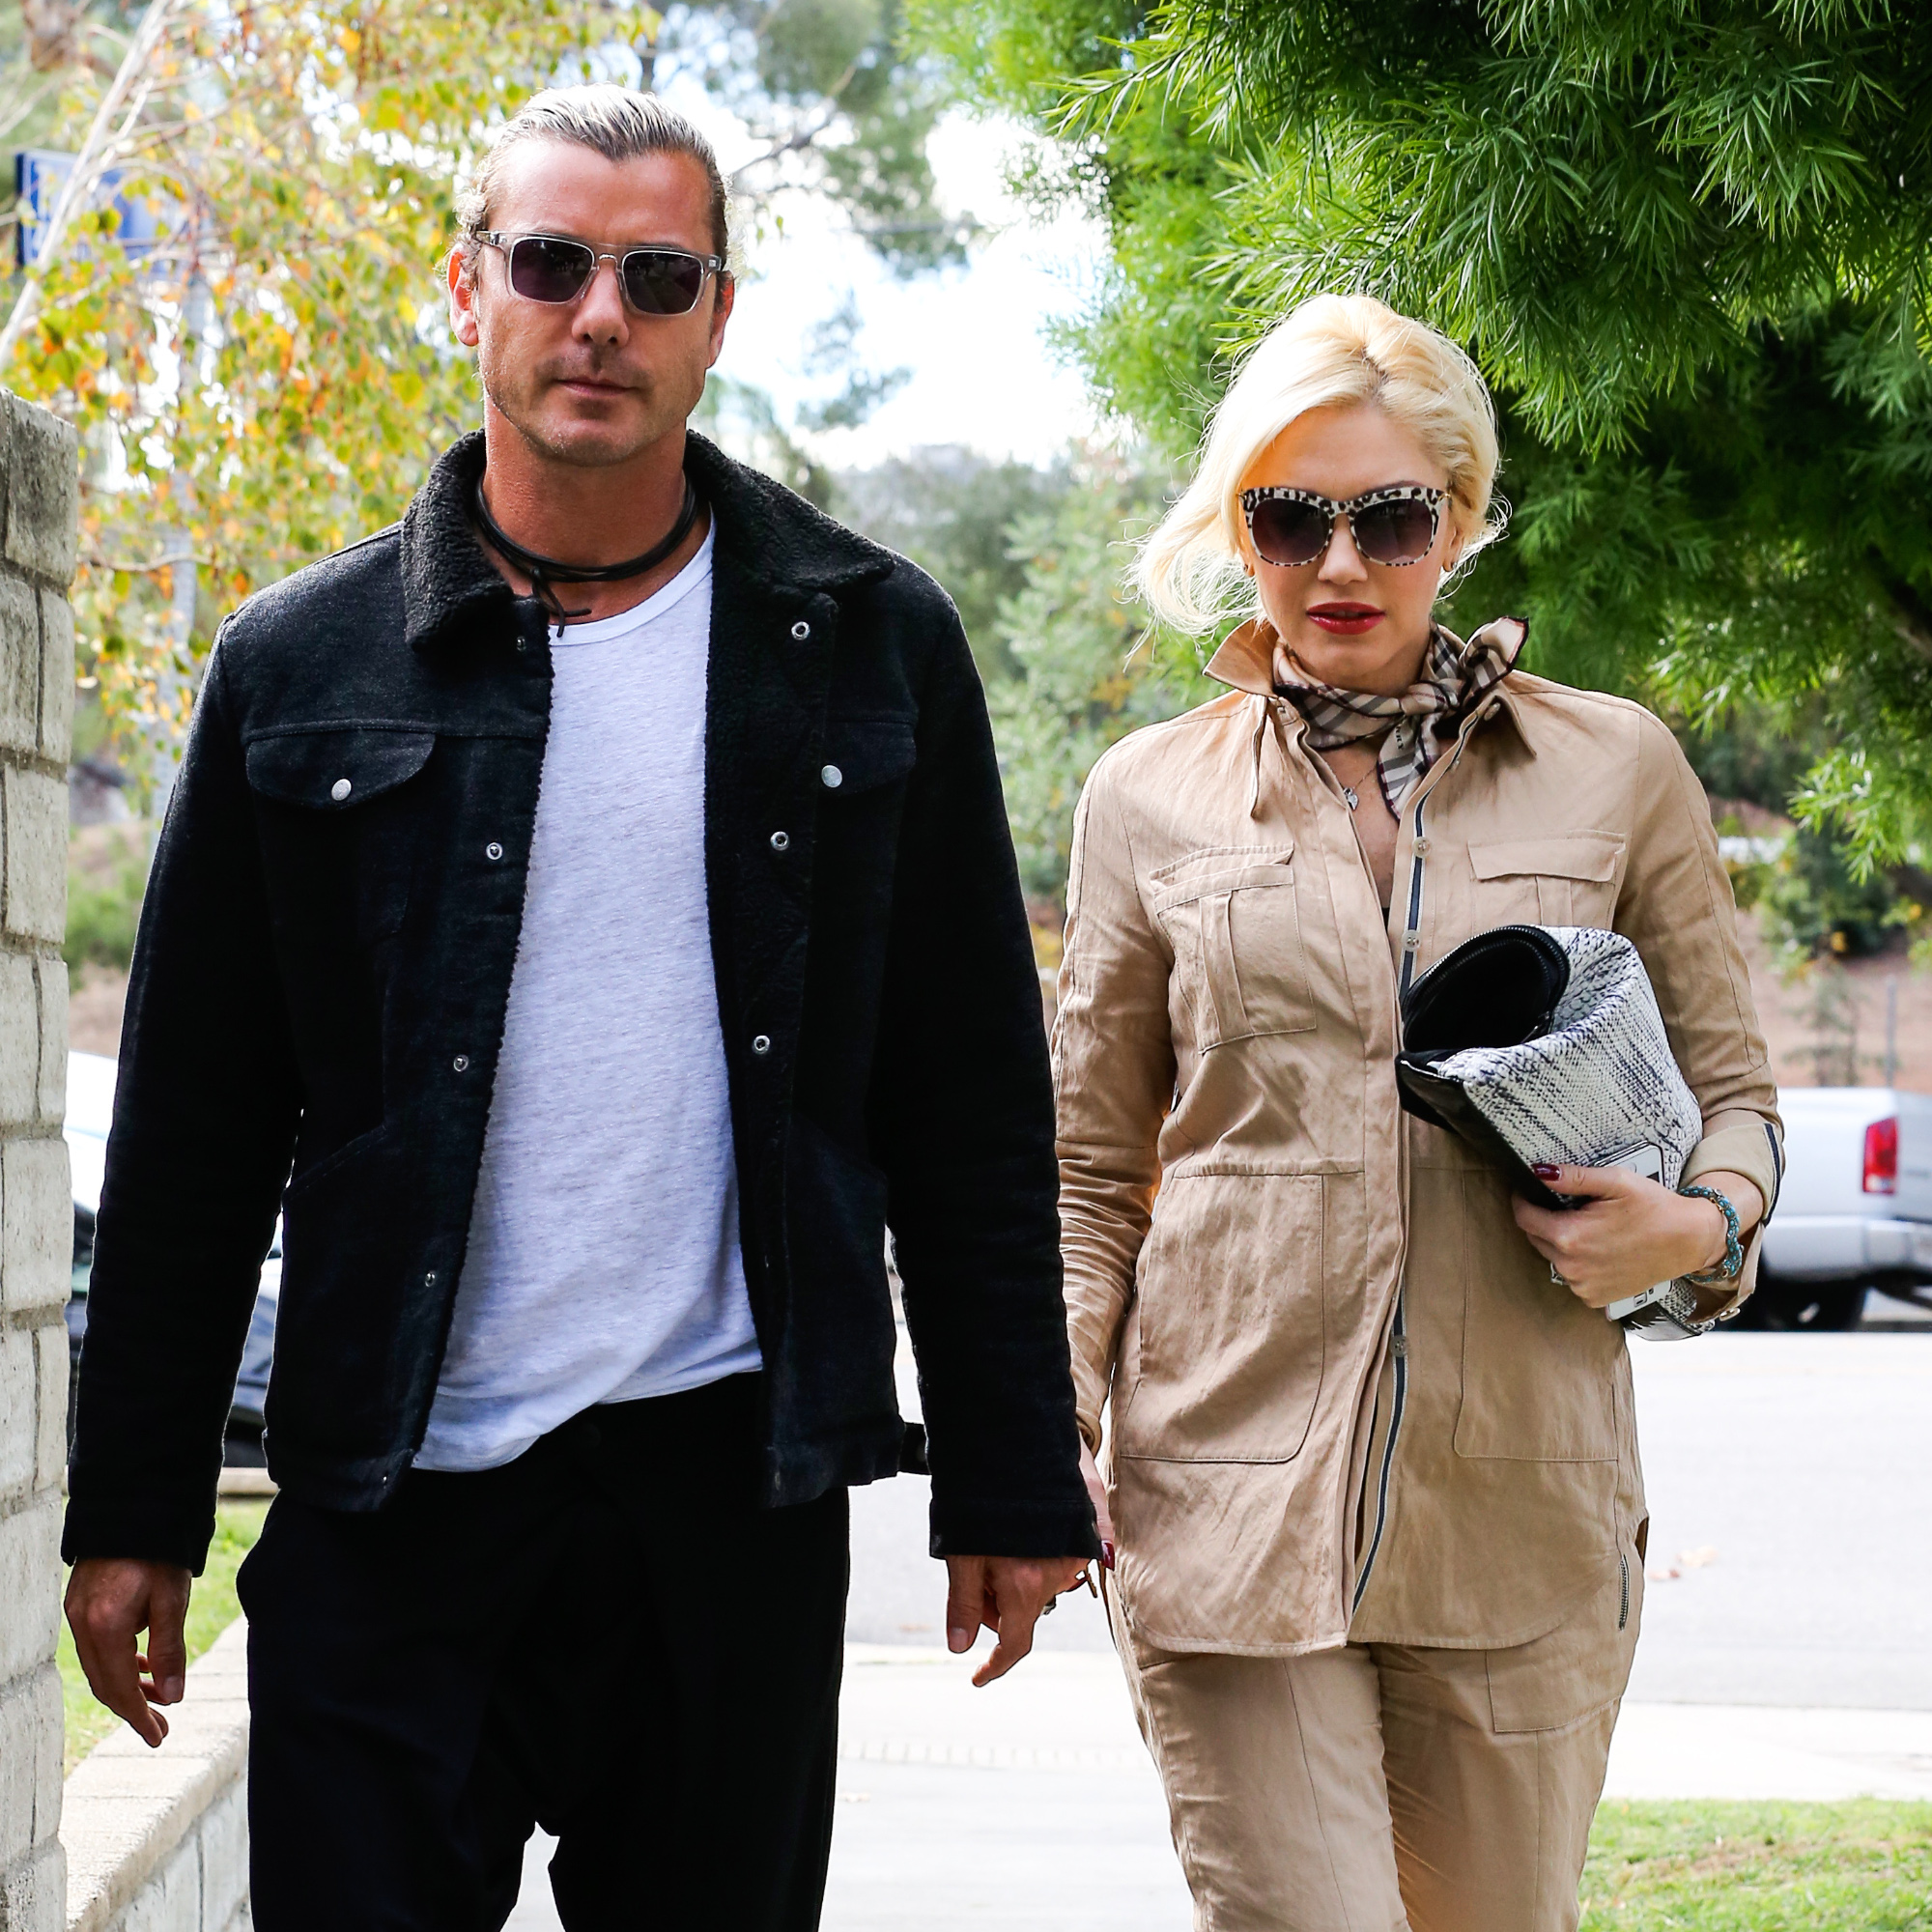 Sherman Oaks, CA - Part 2 - Gwen Stefani and her husband Gavin Rossdale are all smiles after finishing up an appointment in Sherman Oaks. Gwen covered her growing belly in a full khaki outfit, accessorized with a Burberry scarf, black and cream clutch, leopard print sunglasses, and black L.A.M.B. booties.
        November  22, 2013,Image: 177541742, License: Rights-managed, Restrictions: NO Brazil,NO Brazil, Model Release: no, Credit line: AKM Images / Backgrid USA / Profimedia